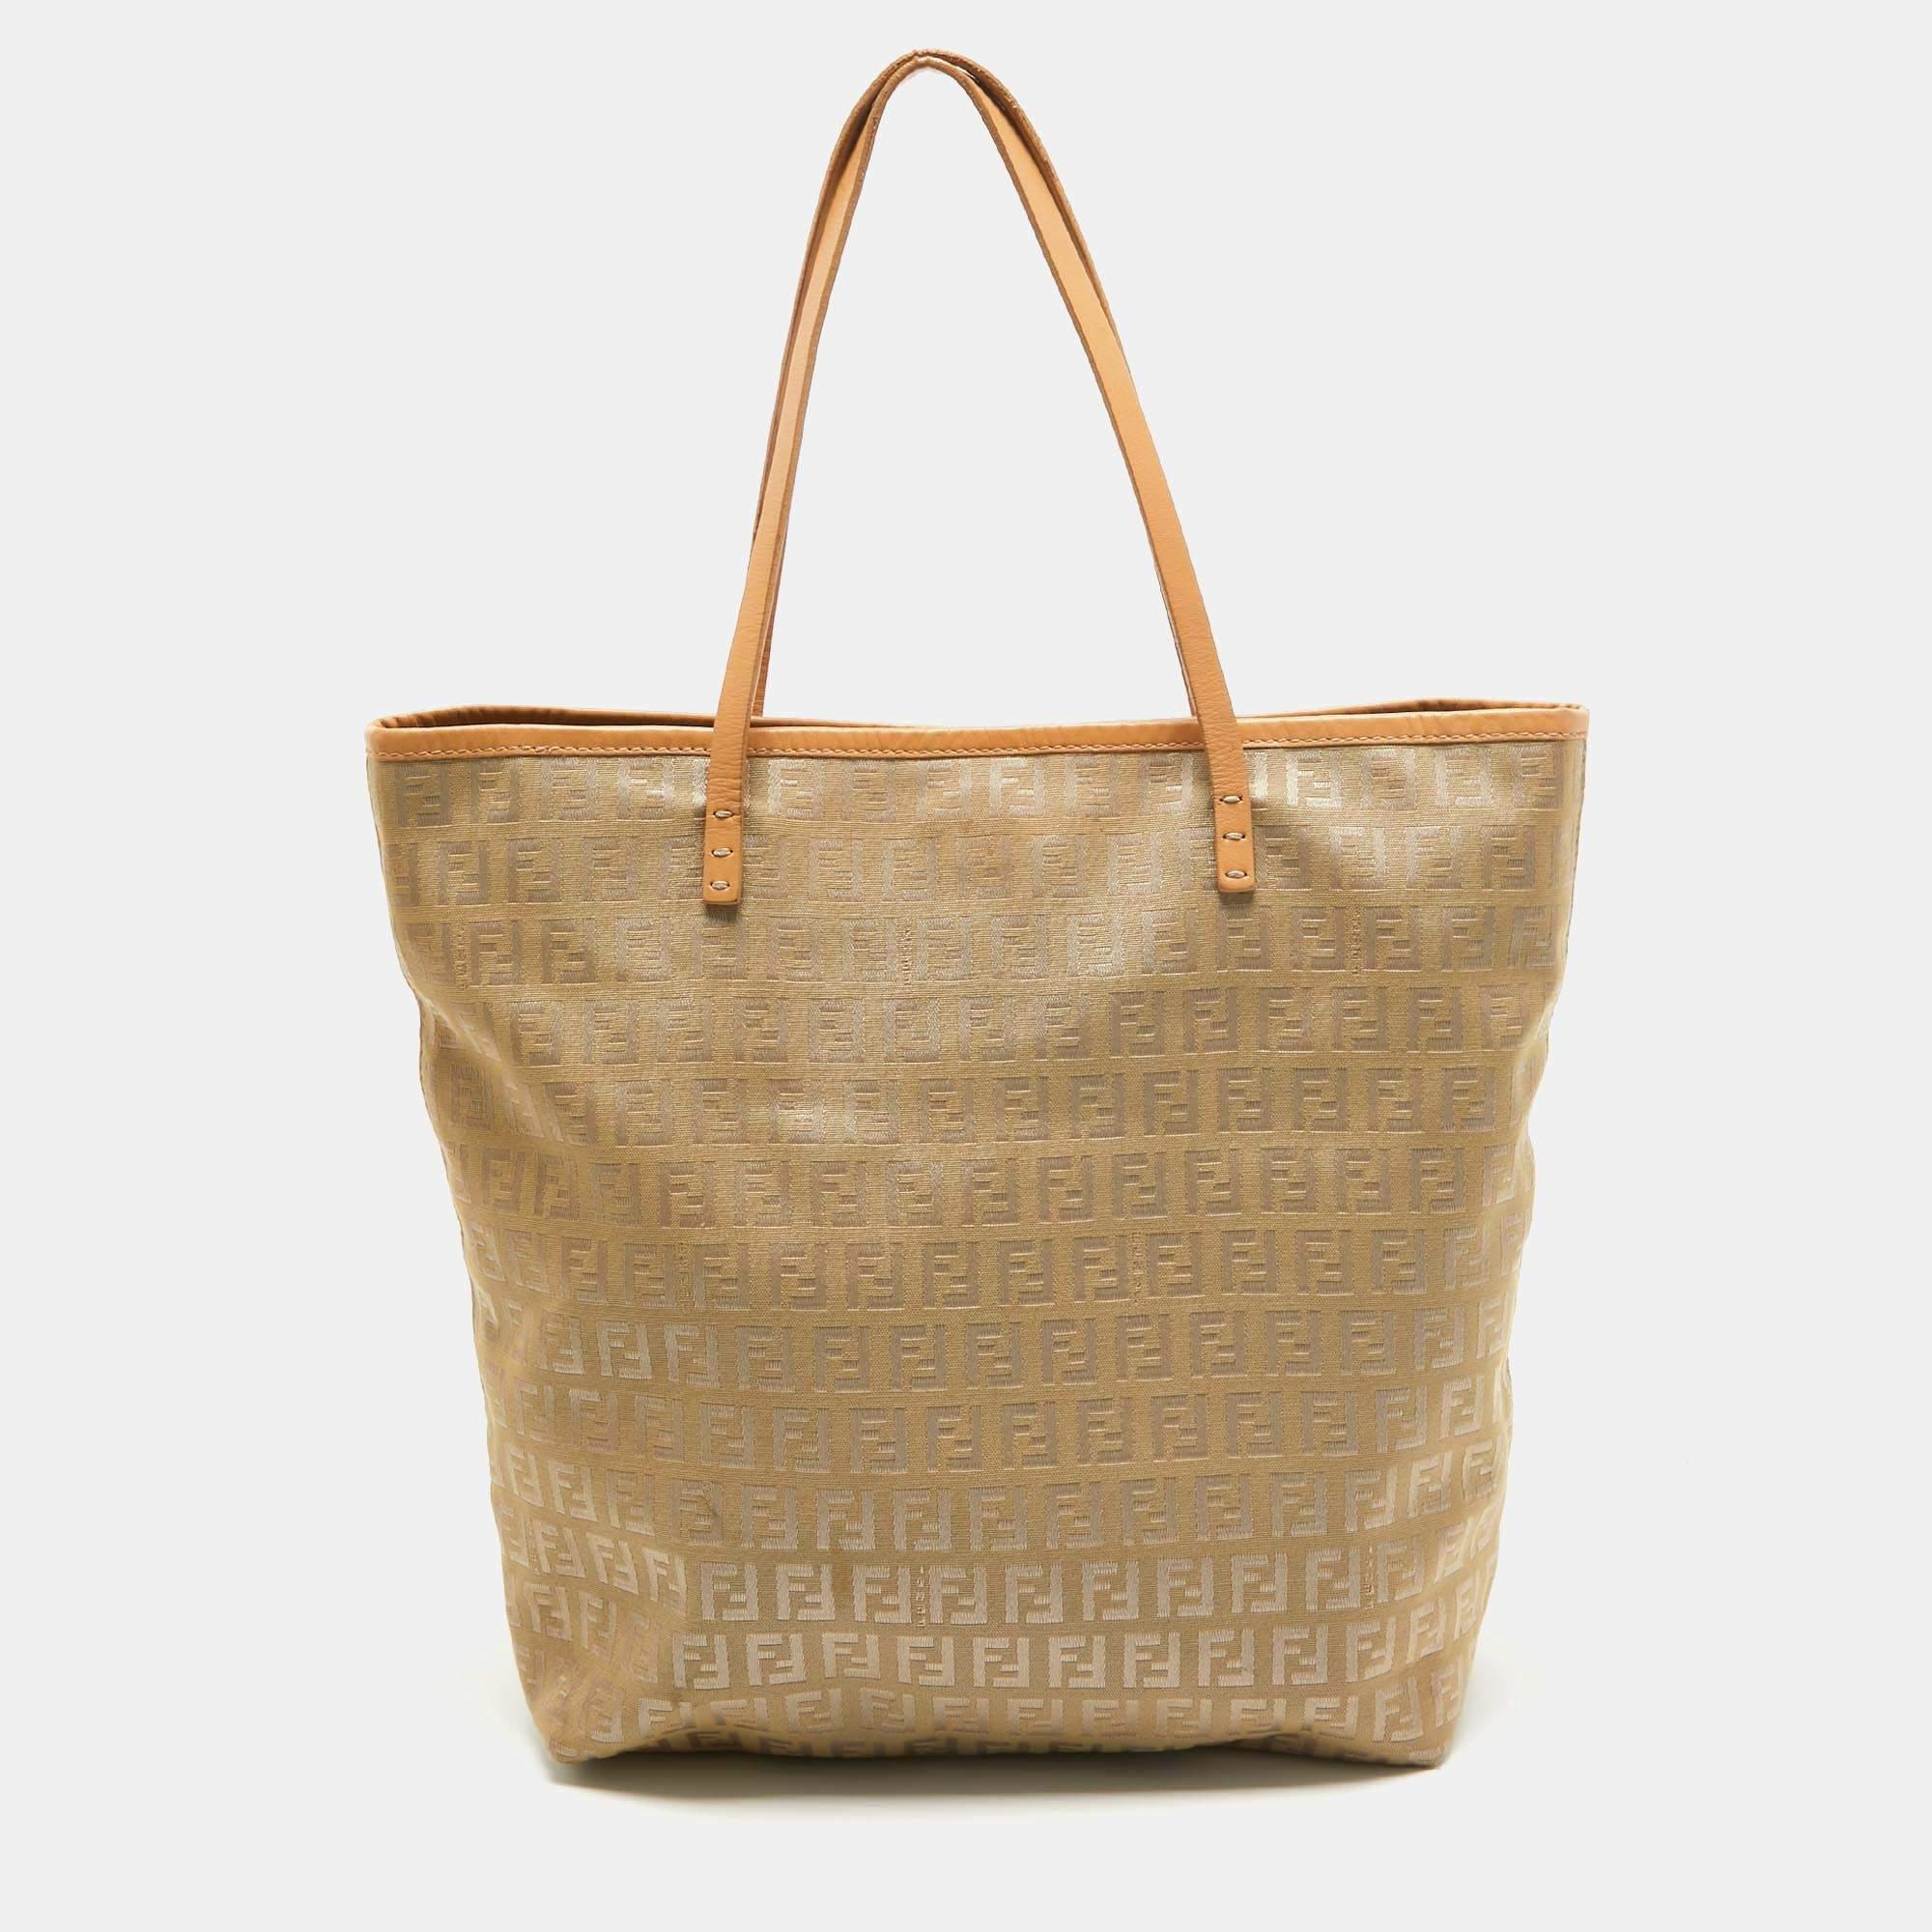 Be it your daily commute to work, shopping sprees, and vacations, a tote bag will never fail you. This designer creation is made to last and assist you in your fashion-filled days.

